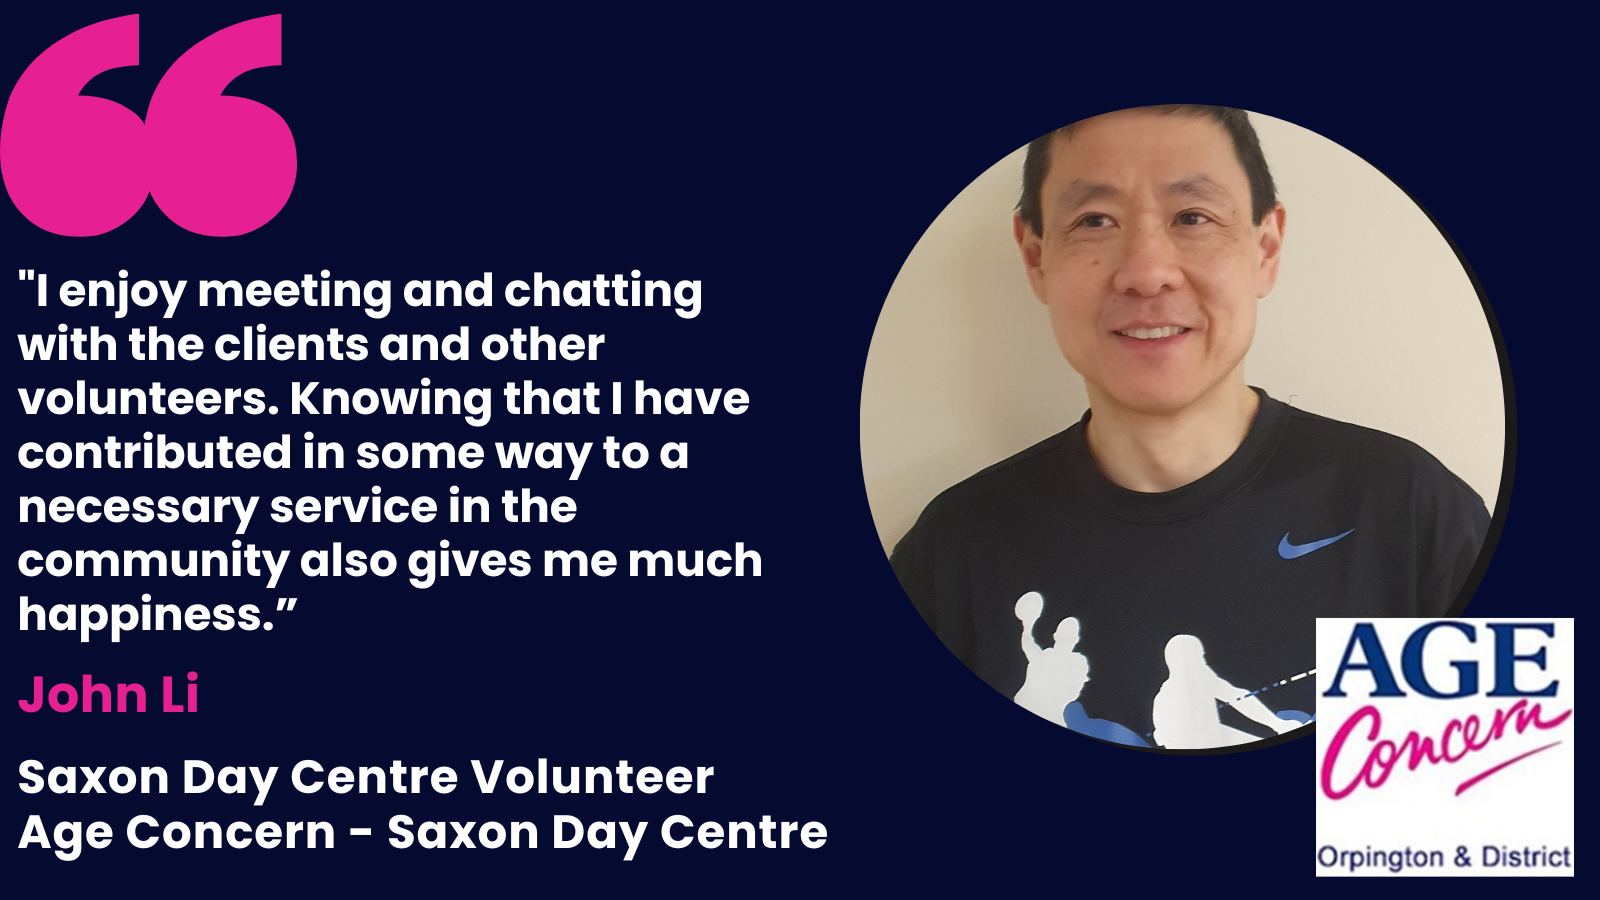 Image with quote from Saxon Day Centre volunteer, John Li. Words of quote "I enjoy meeting and chatting with the clients and other volunteers. Knowing that I have contributed in some way to a necessary service in the community also gives me happiness"